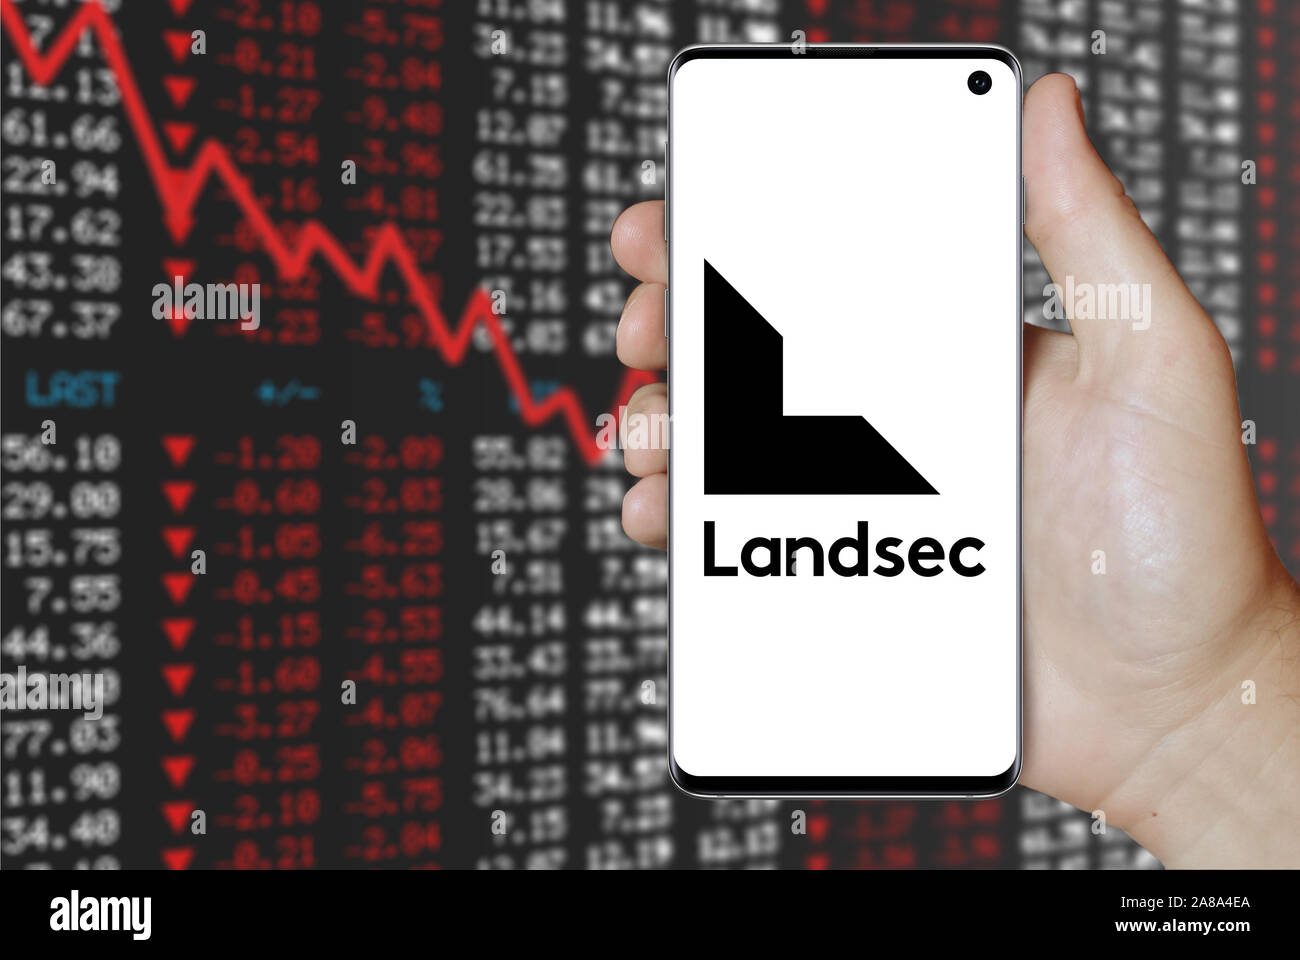 Logo of public company Land Securities displayed on a smartphone. Negative stock market background. Credit: PIXDUCE Stock Photo